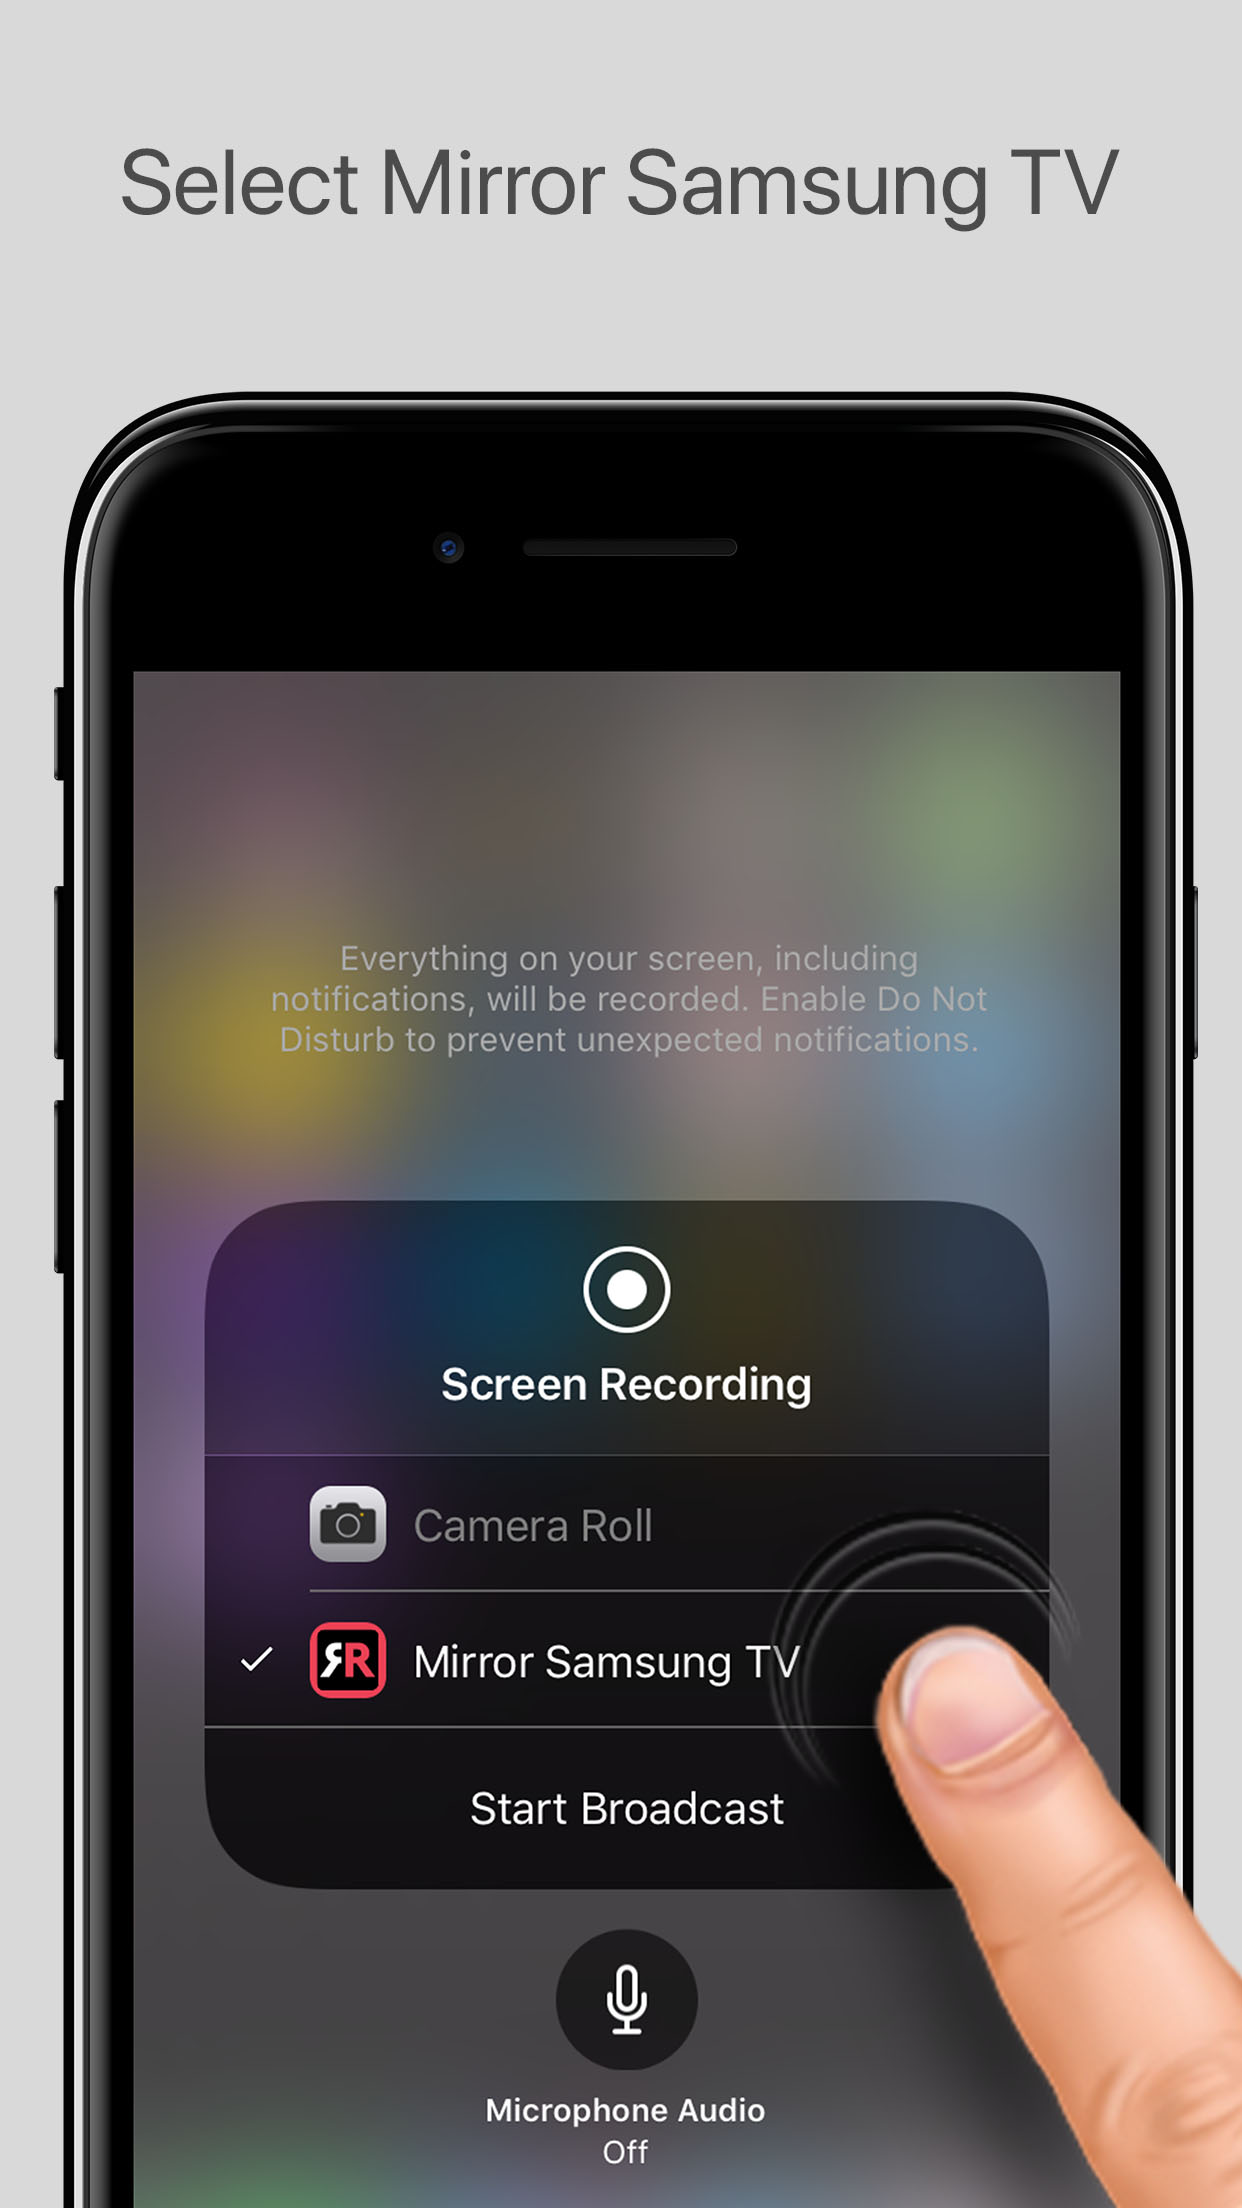 Mirror Your Iphone Or Ipad On A Smart Tv, Mirror Iphone To Panasonic Tv